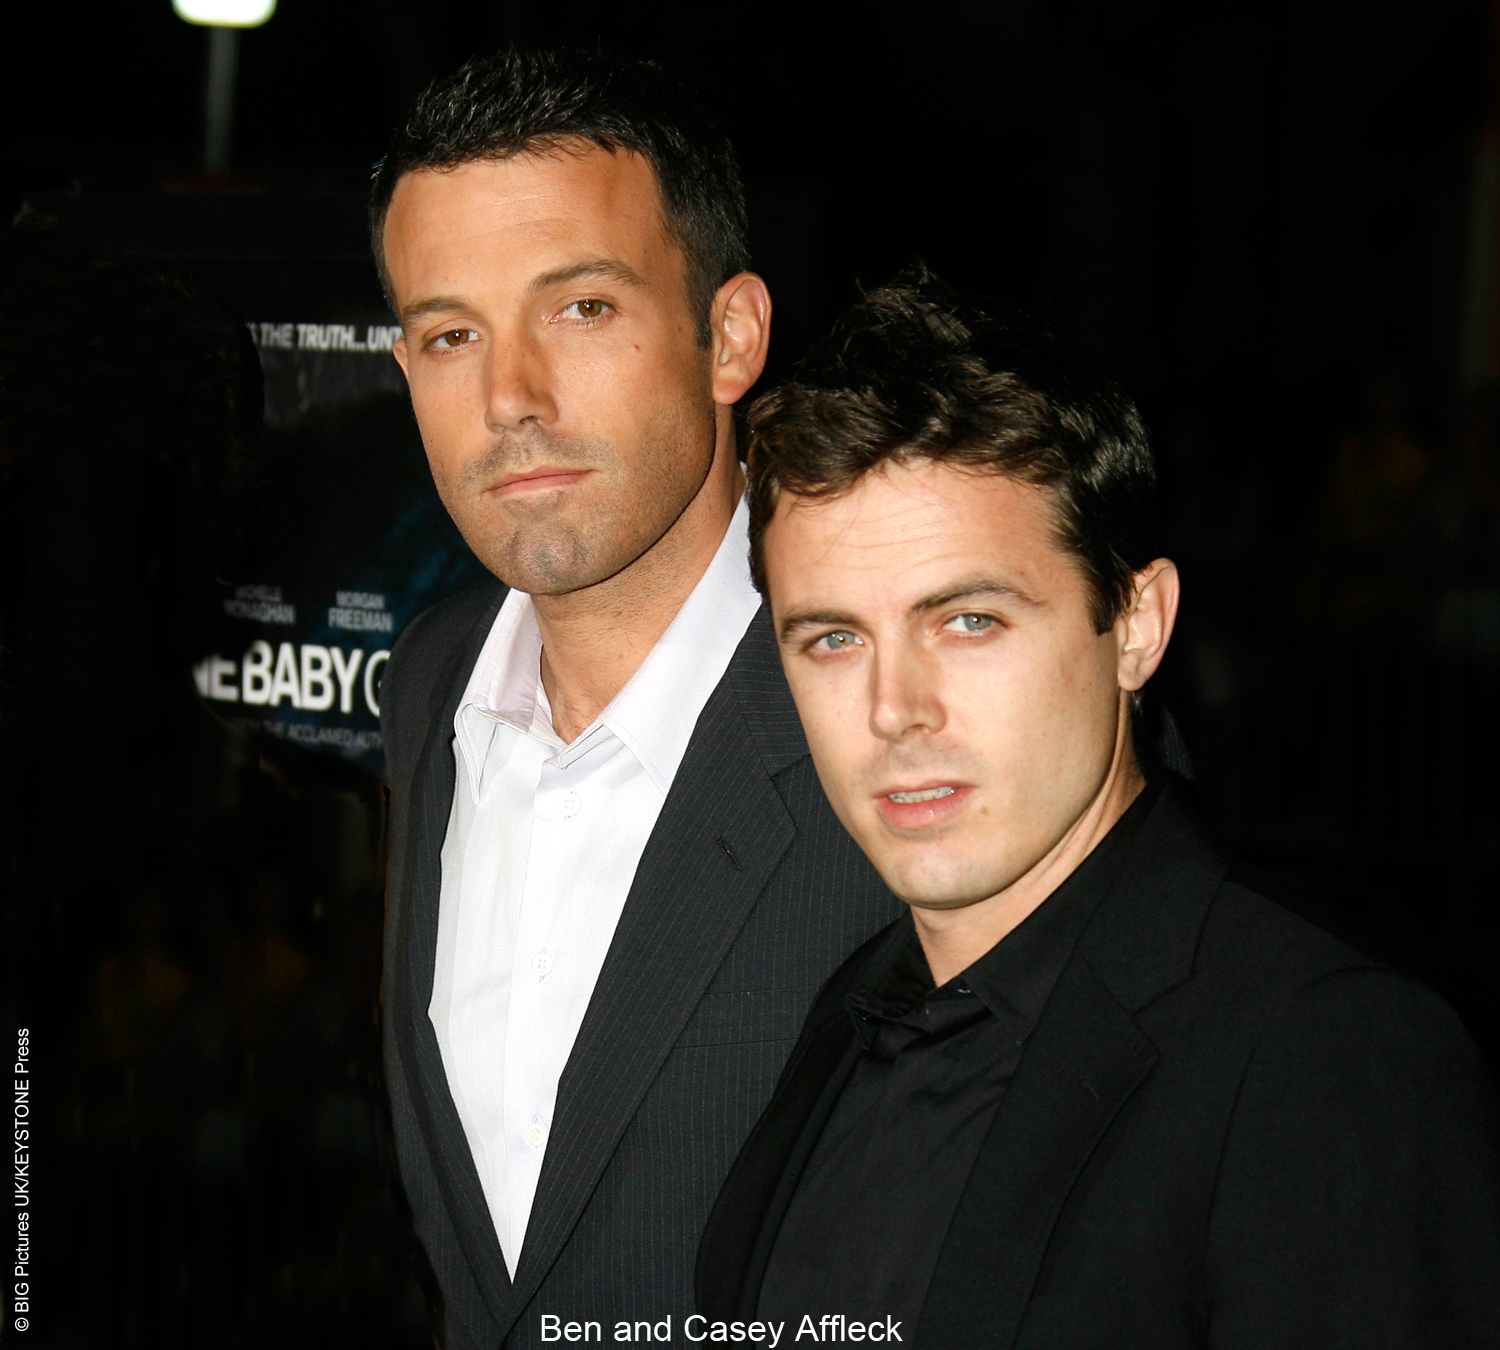 Brothers Ben and Casey Affleck found they had a passion for acting at a very young age. Neither of the boys were focused in school, and broke into the industry early. Younger brother Casey already has a Supporting Actor Oscar nomination under his belt for The Assassination of Jesse James by the Coward Robert Ford, […]